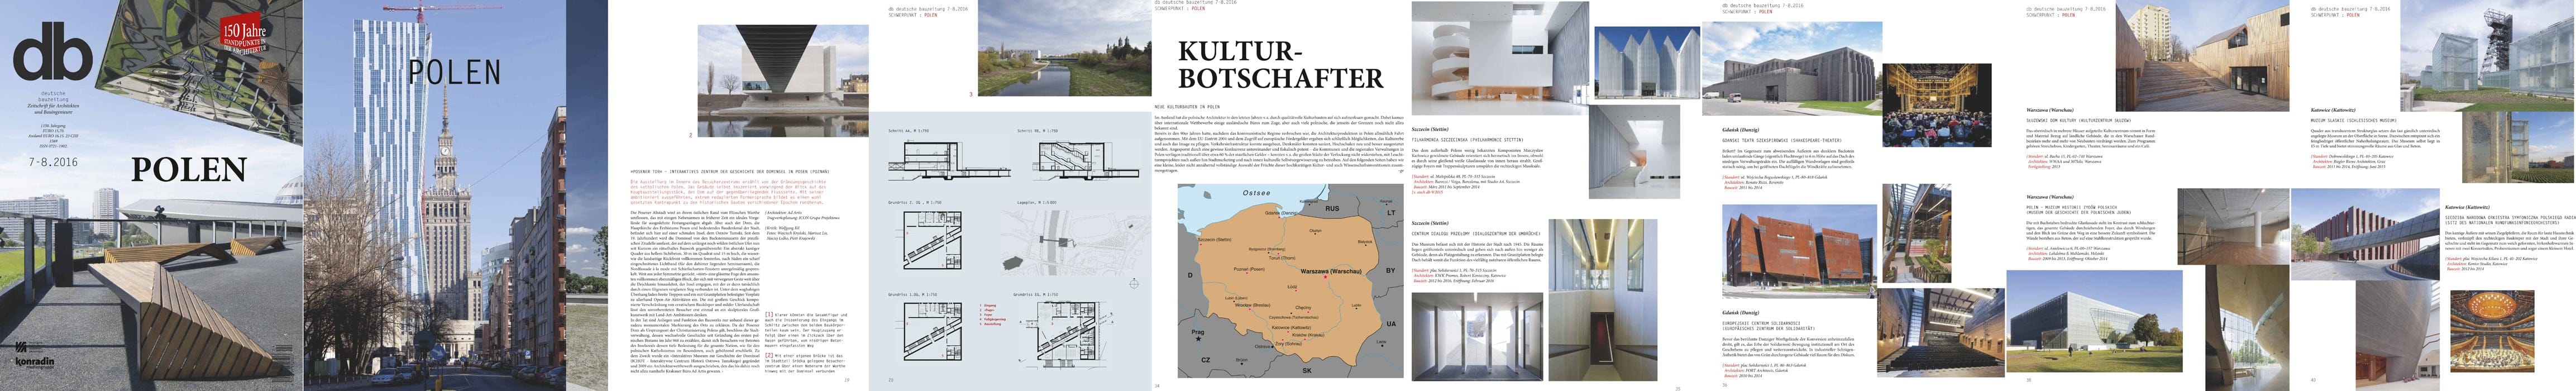 Photograph of the International Conference Center in Katowice (on the cover) and photographs of other objects. - db deutsche bauzeitung 07/2016